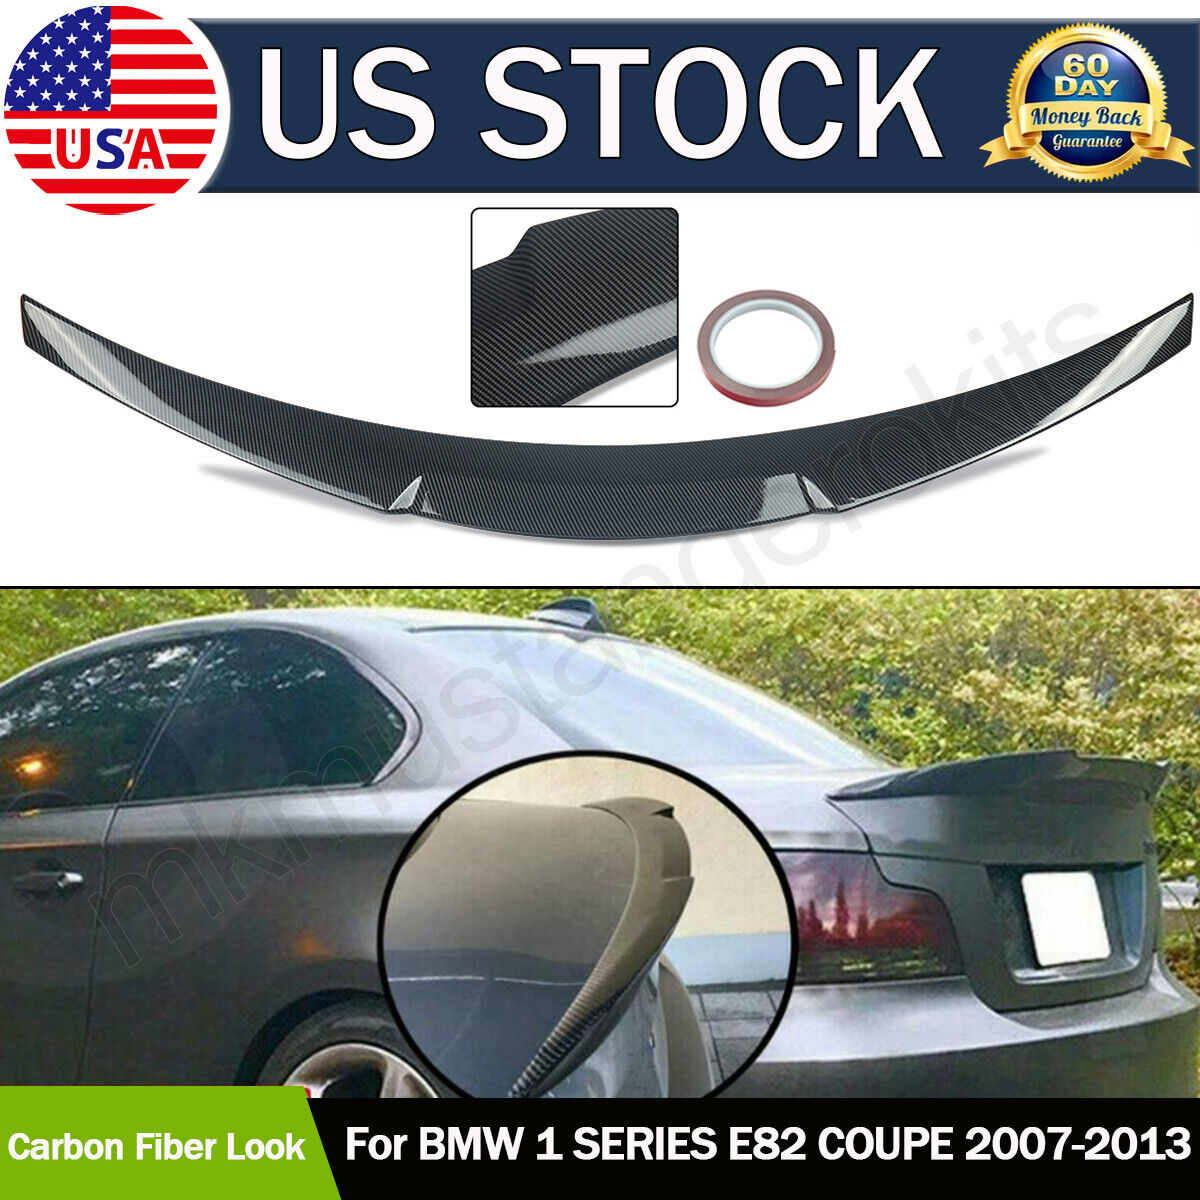 M4 Style Rear Trunk Spoiler Wing For BMW E82 128i 135i Coupe 07-13 Carbon Look